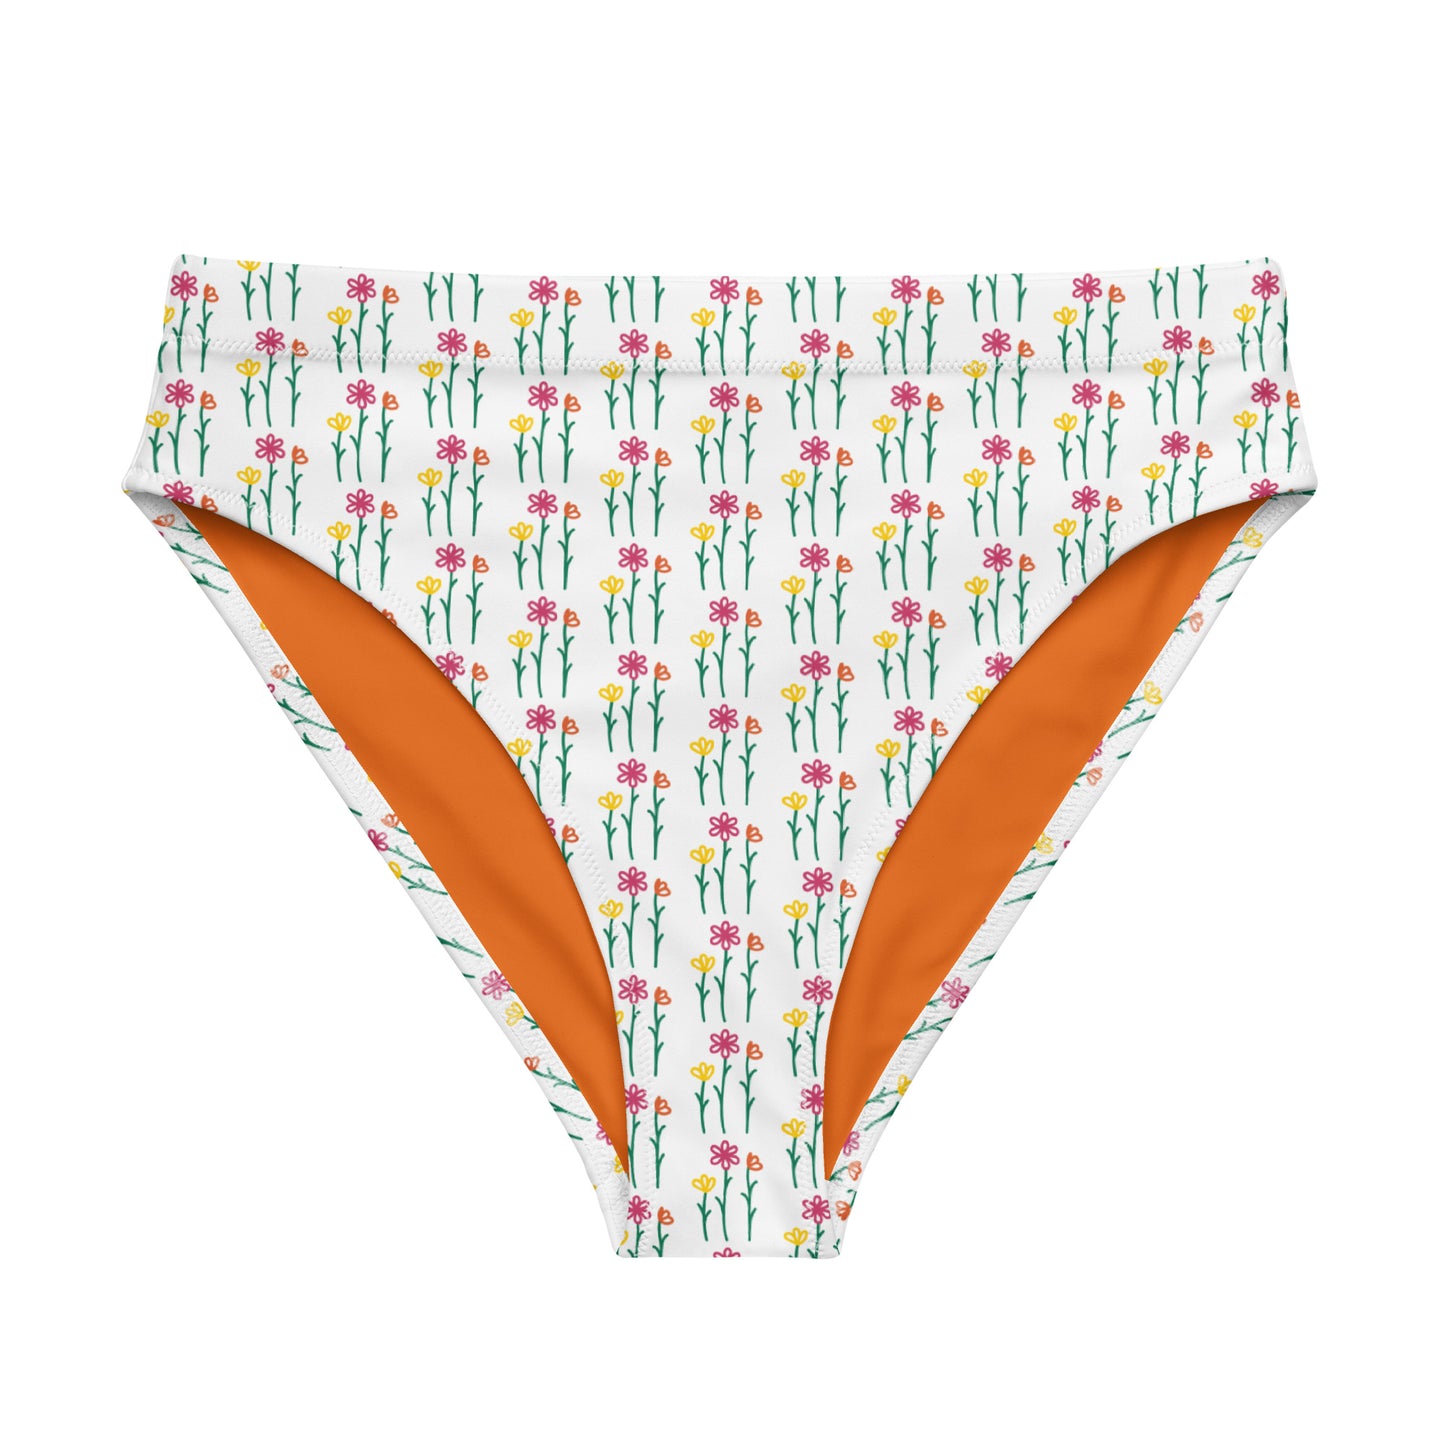 be yourself - recycled high-waisted bikini bottom by the banannie diaries